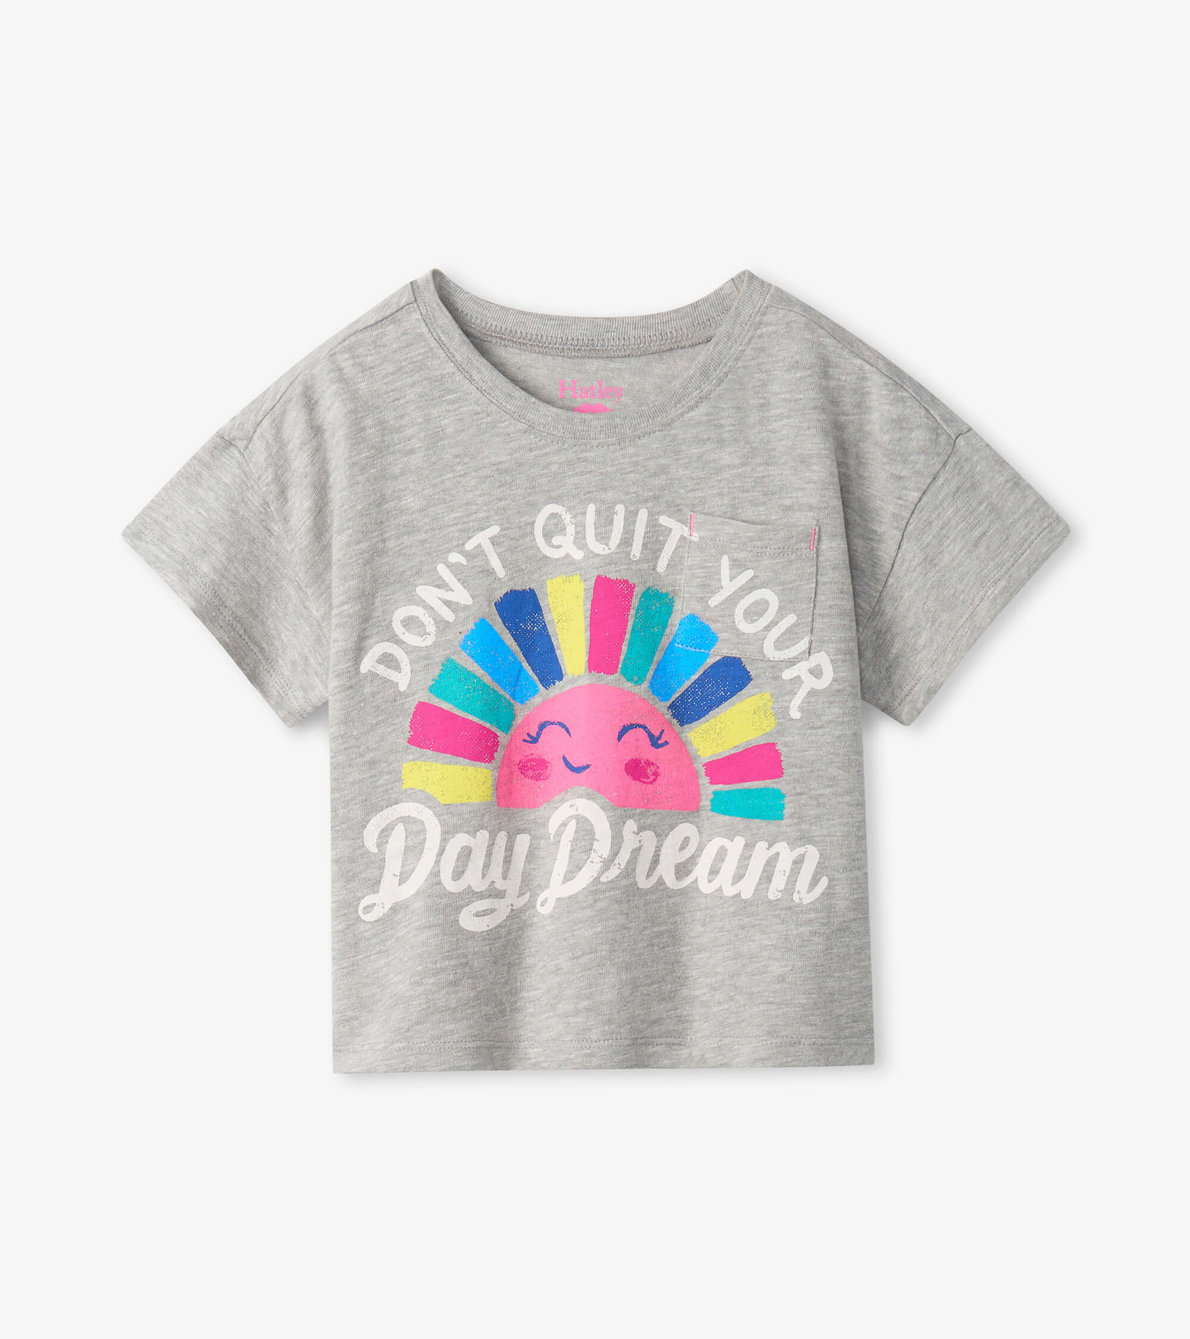 View larger image of Daydream Front Pocket Tee